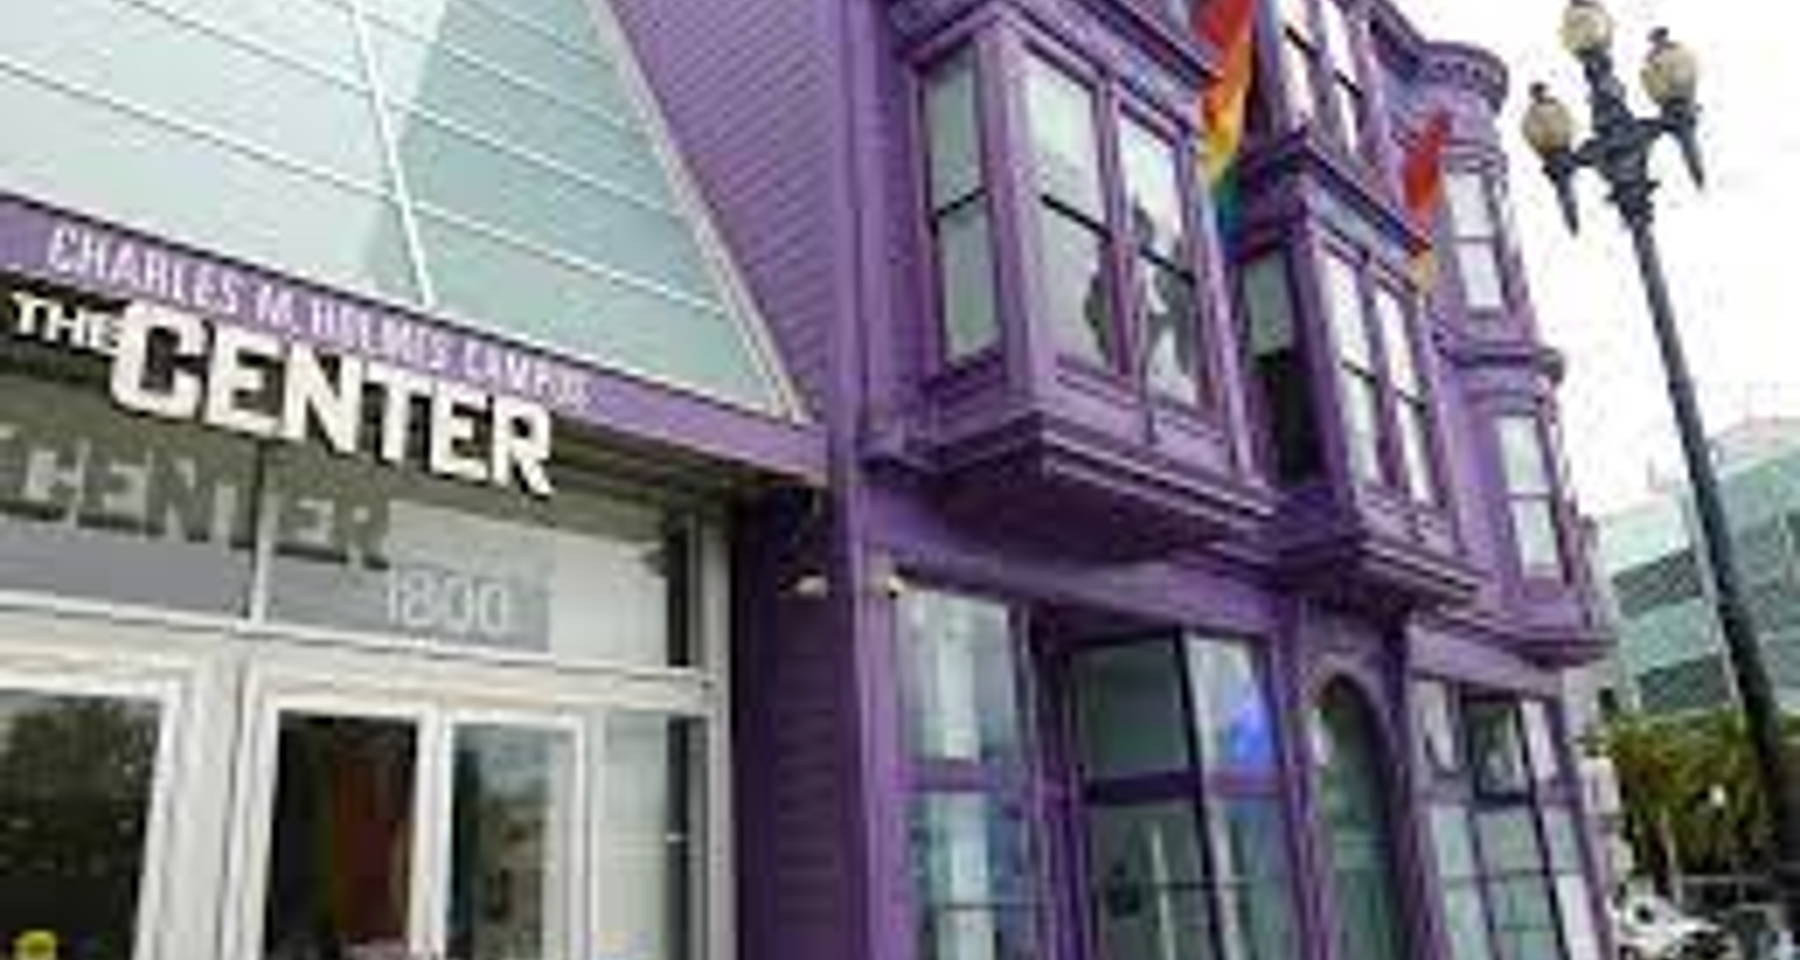 Closing Event of art exhibition at SF LGBT Center